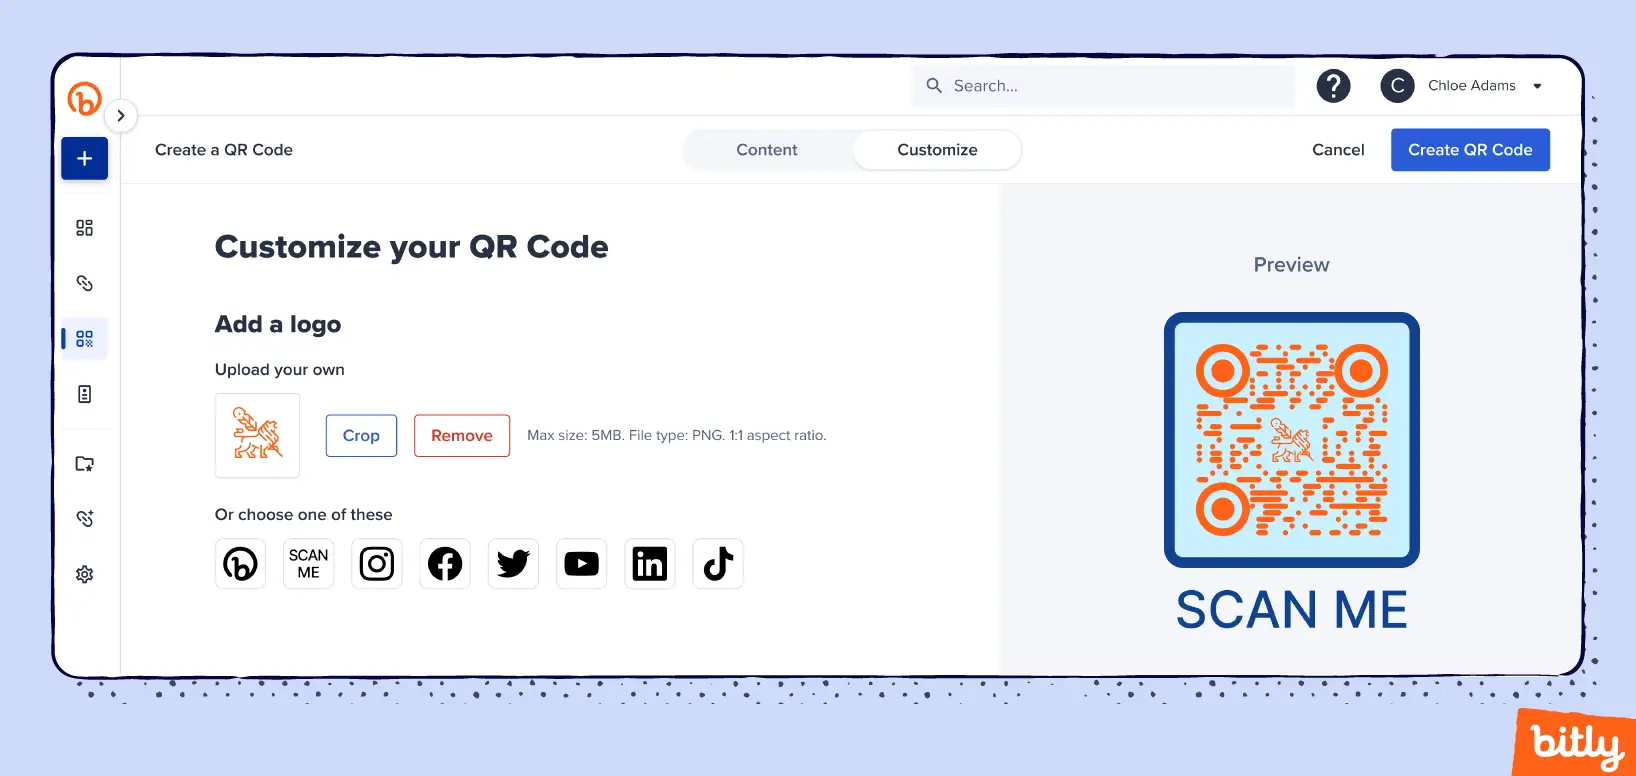 The menu in the Bitly Connections Platform where a user can upload their own logo or choose a social media icon to add to their QR Code.